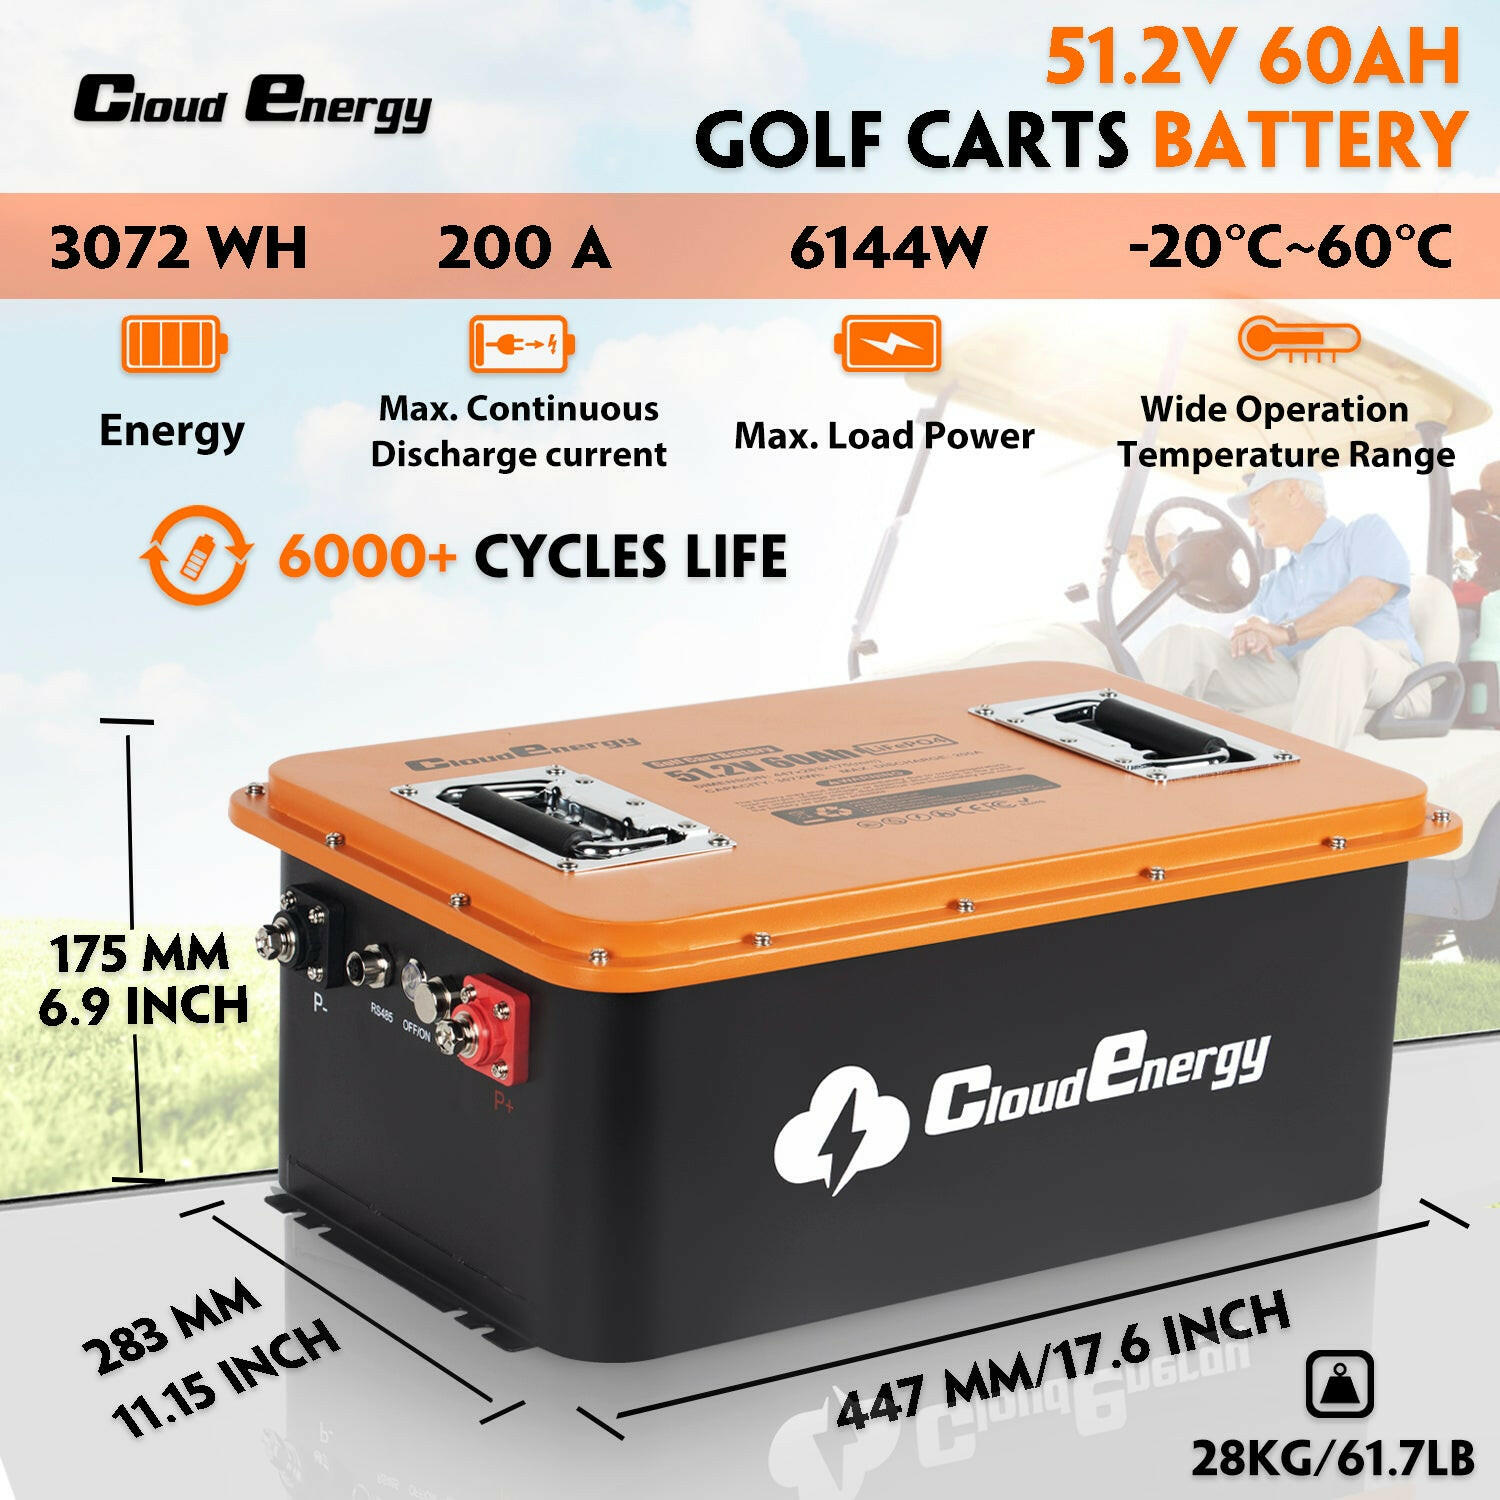 48V(51.2V) 60Ah LiFePO4 Lithium Golf Cart Battery with  20A Charger - CloudEnergy